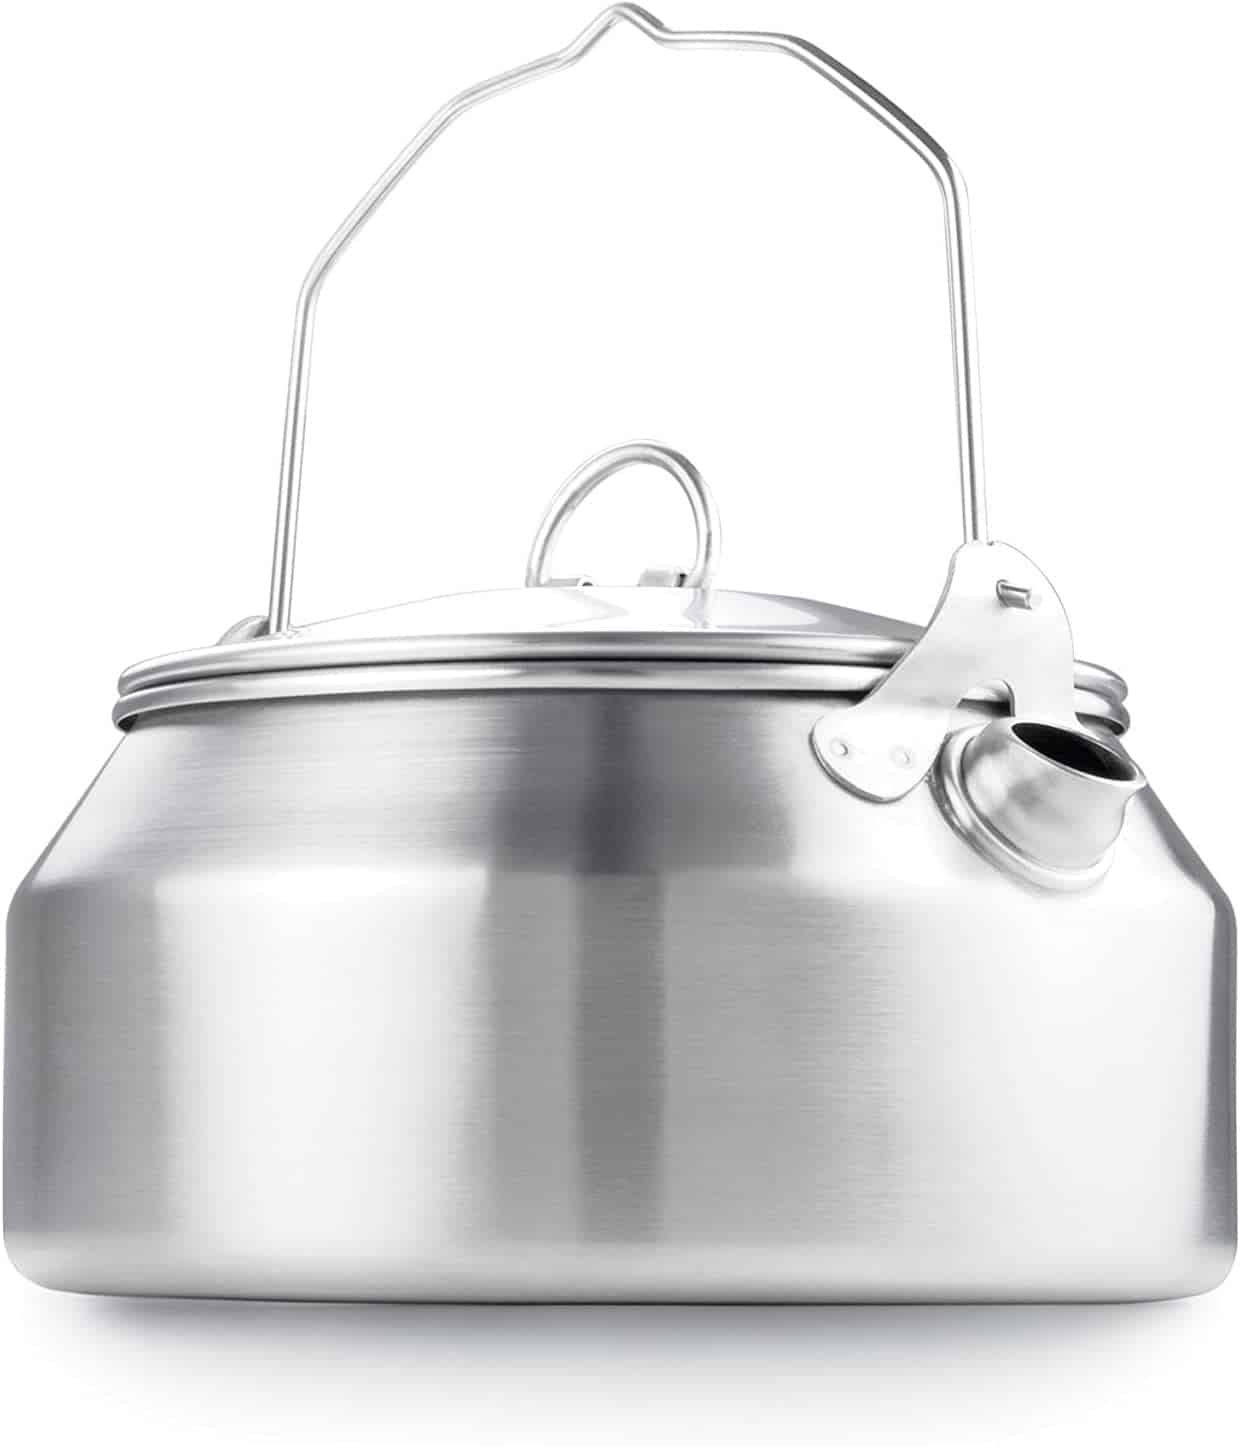 gsi outdoors glacier stainless steel kettle